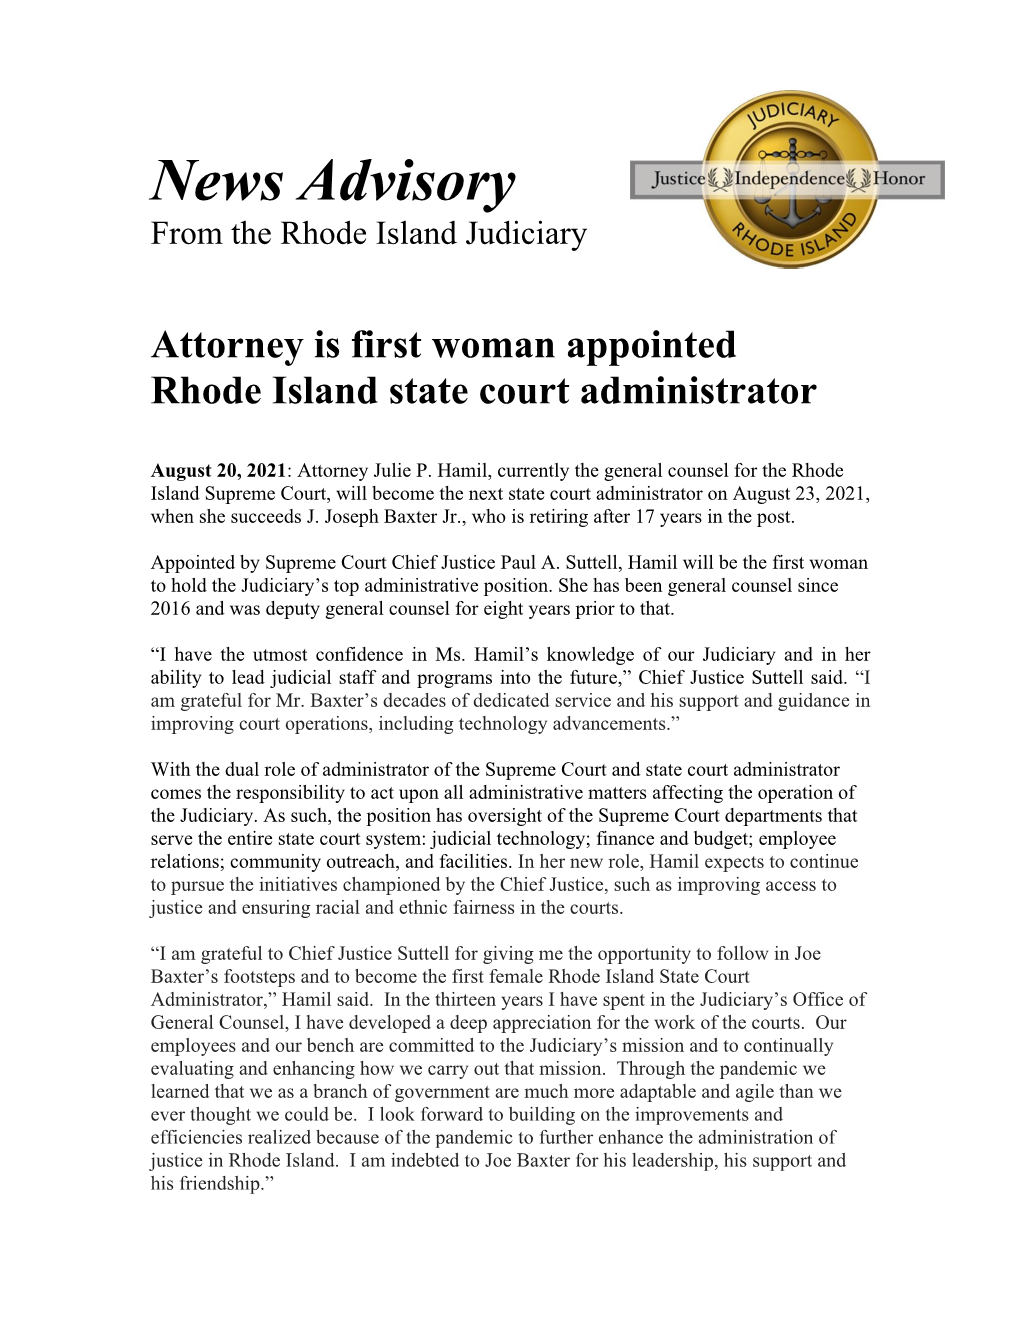 First Woman Appointed As State Court